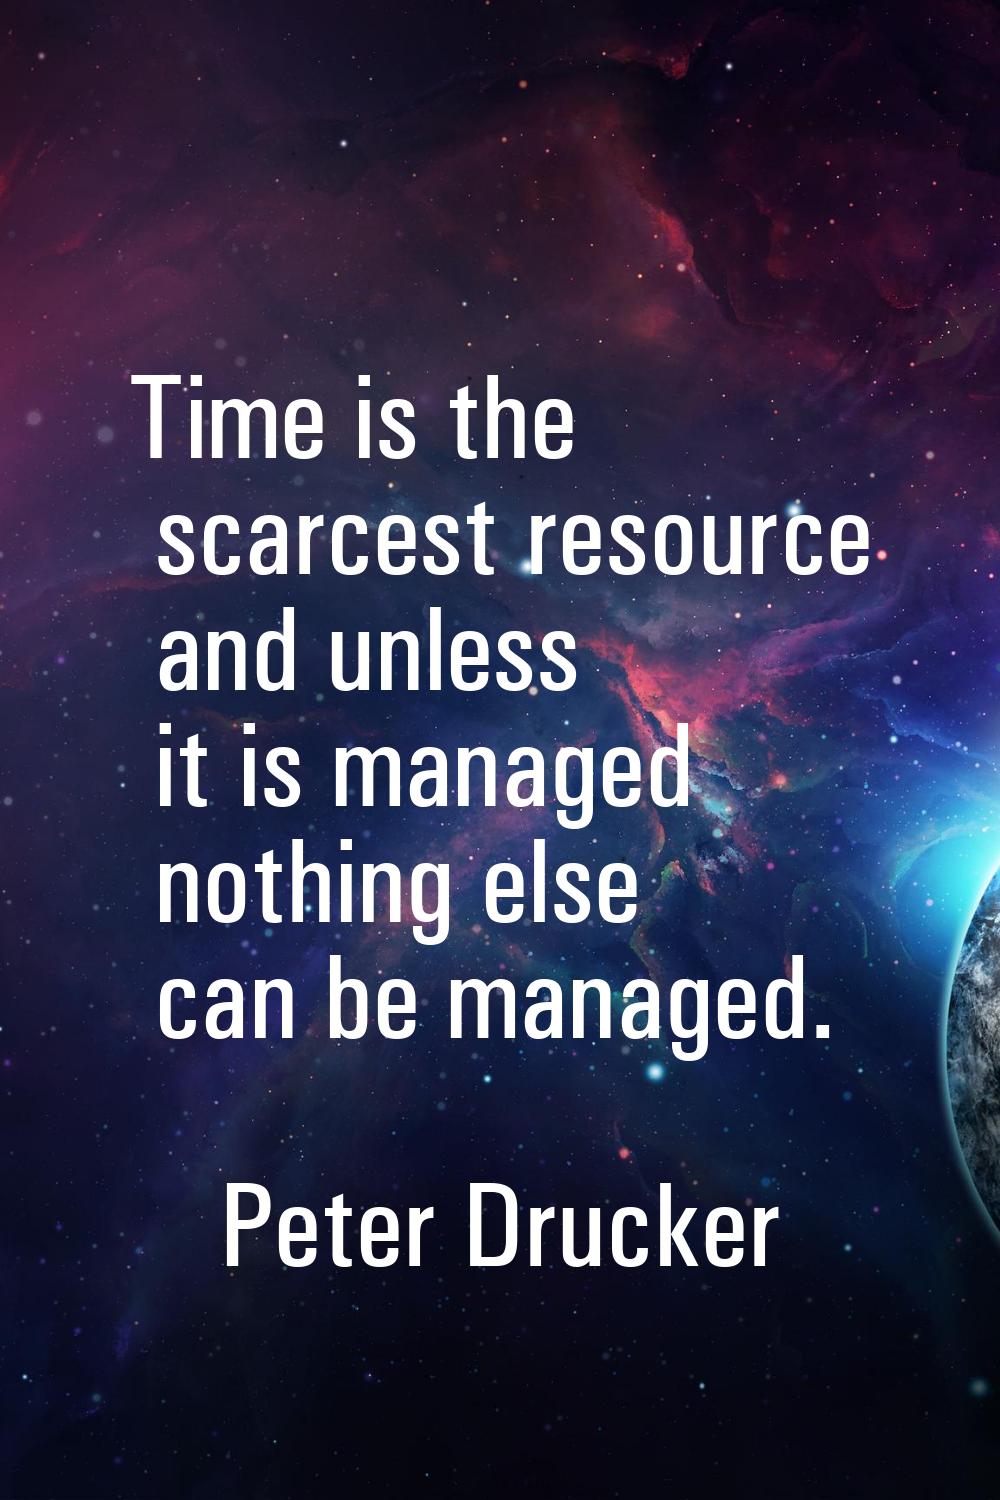 Time is the scarcest resource and unless it is managed nothing else can be managed.